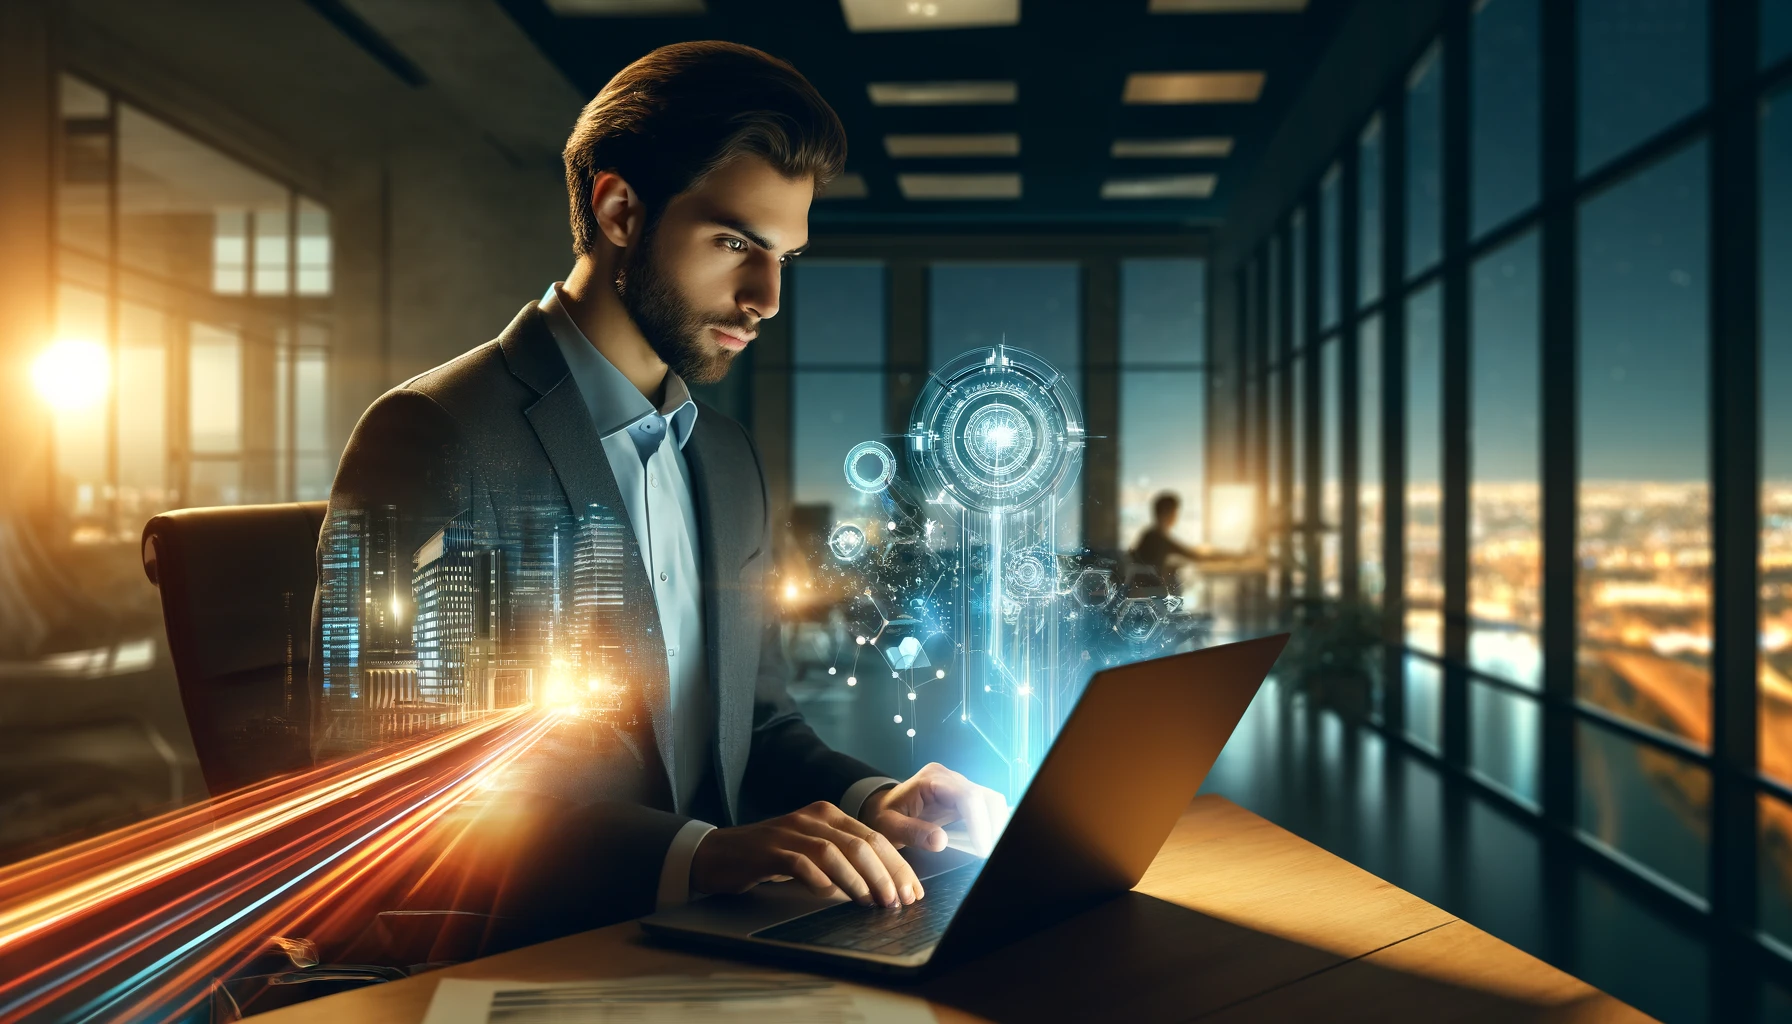 a young professional man working intently on a laptop in a modern office environment at night. The scene is enhanced by futuristic digital holograms emerging from the laptop, set against a backdrop of a cityscape illuminated by ambient lights.